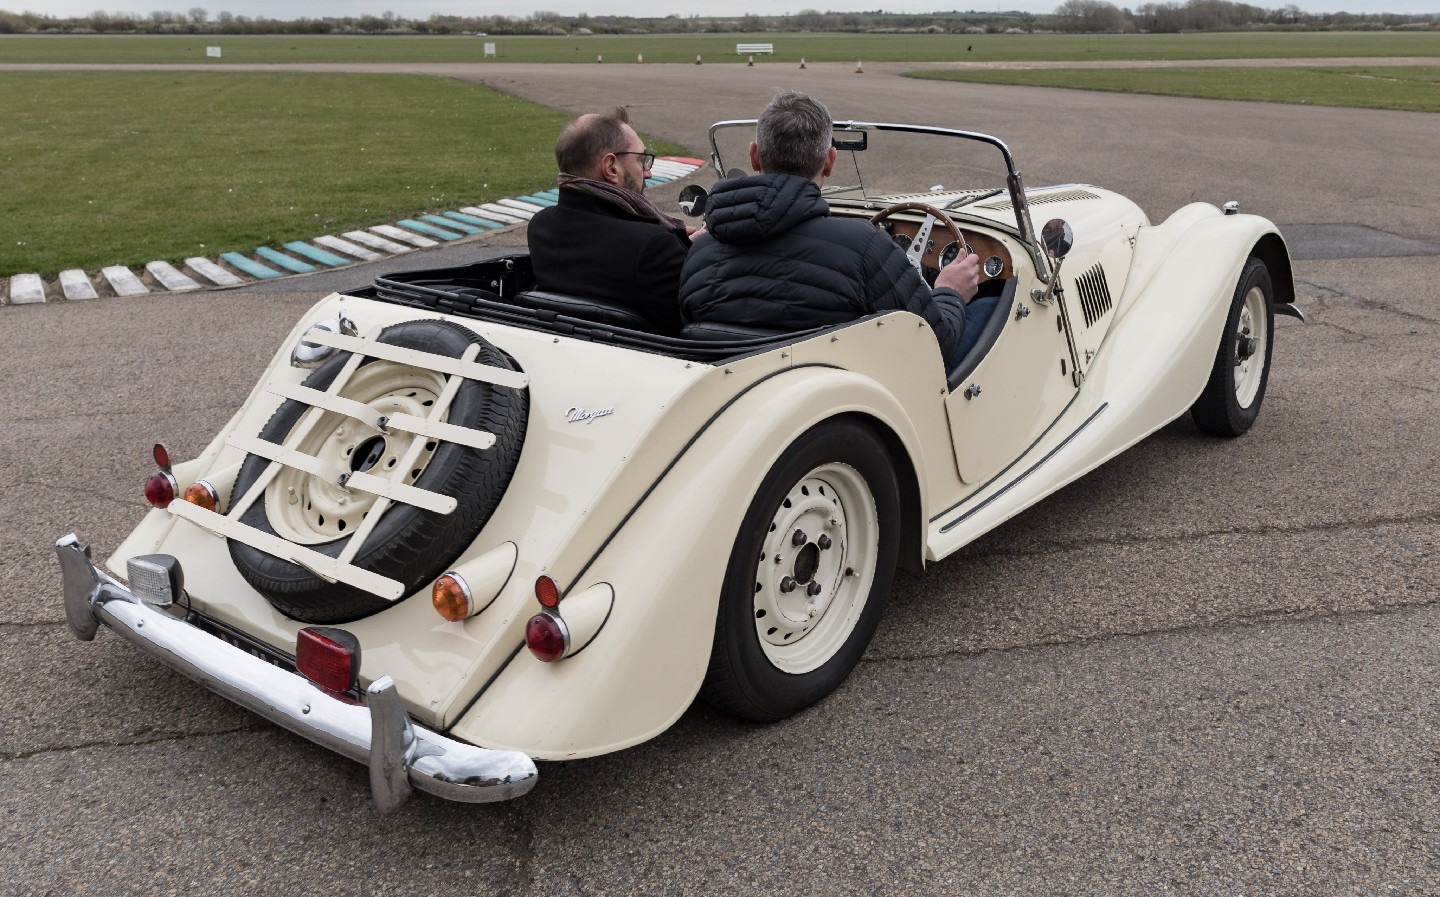 Will Dron, Steve Drummond, Ian Newstead: Electrogenic classic car electric conversions